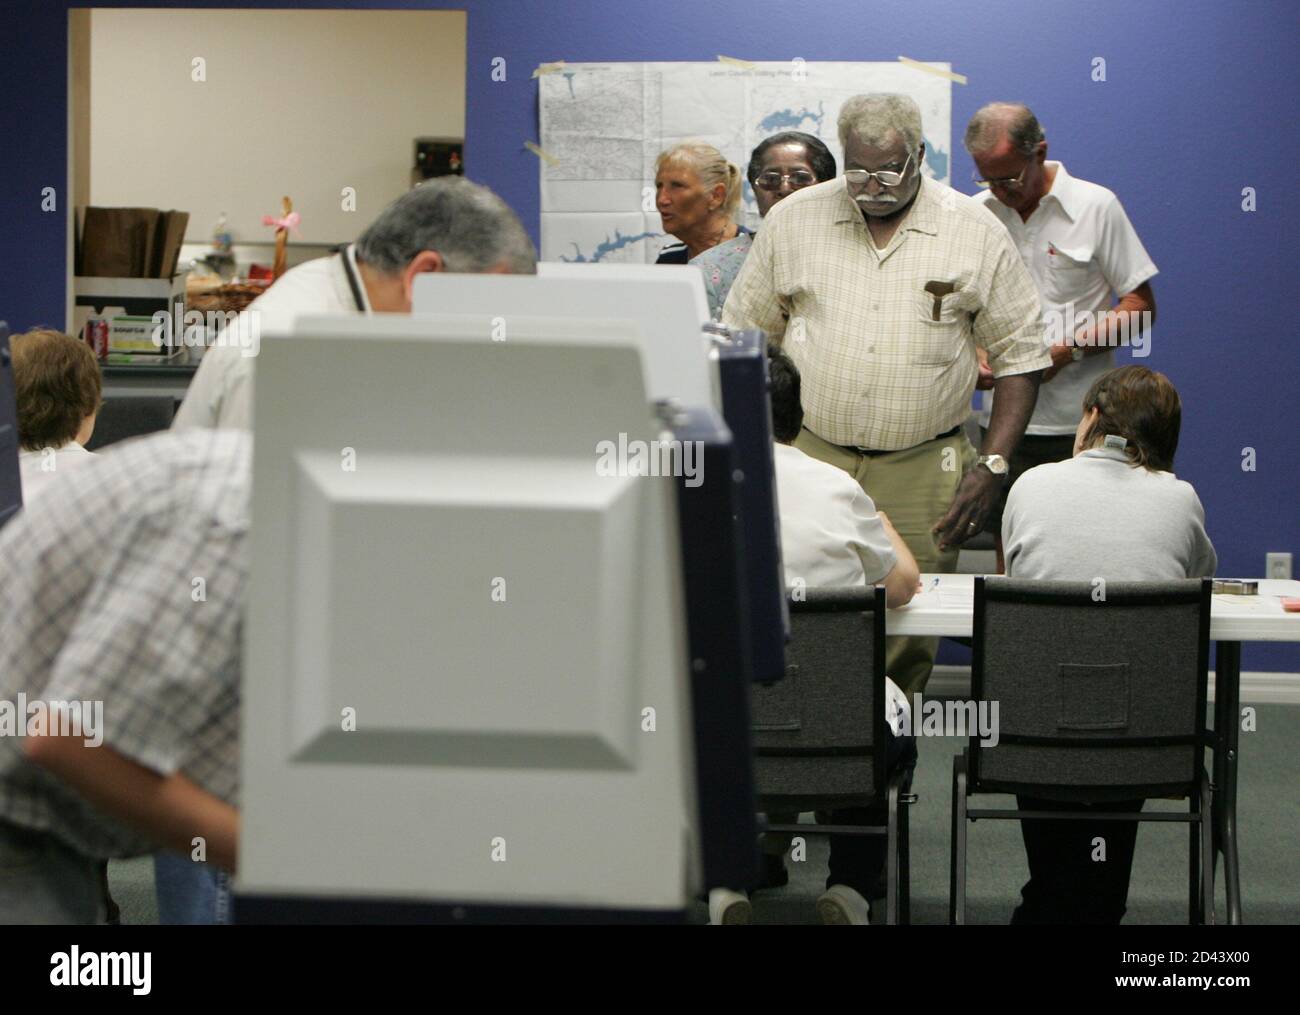 Louis Henry (R) waits to sign for his ballot at precinct 4457 in Leon County, Florida during the early voting hours on November 2, 2004. Voters turned out in large numbers on Tuesday to deliver an unpredictable verdict on U.S. President George W. Bush and Democratic nominee John Kerry as the long, bitter and deadlocked White House race drew to a close. REUTERS/Mark Wallheiser US ELECTION  MW Stock Photo